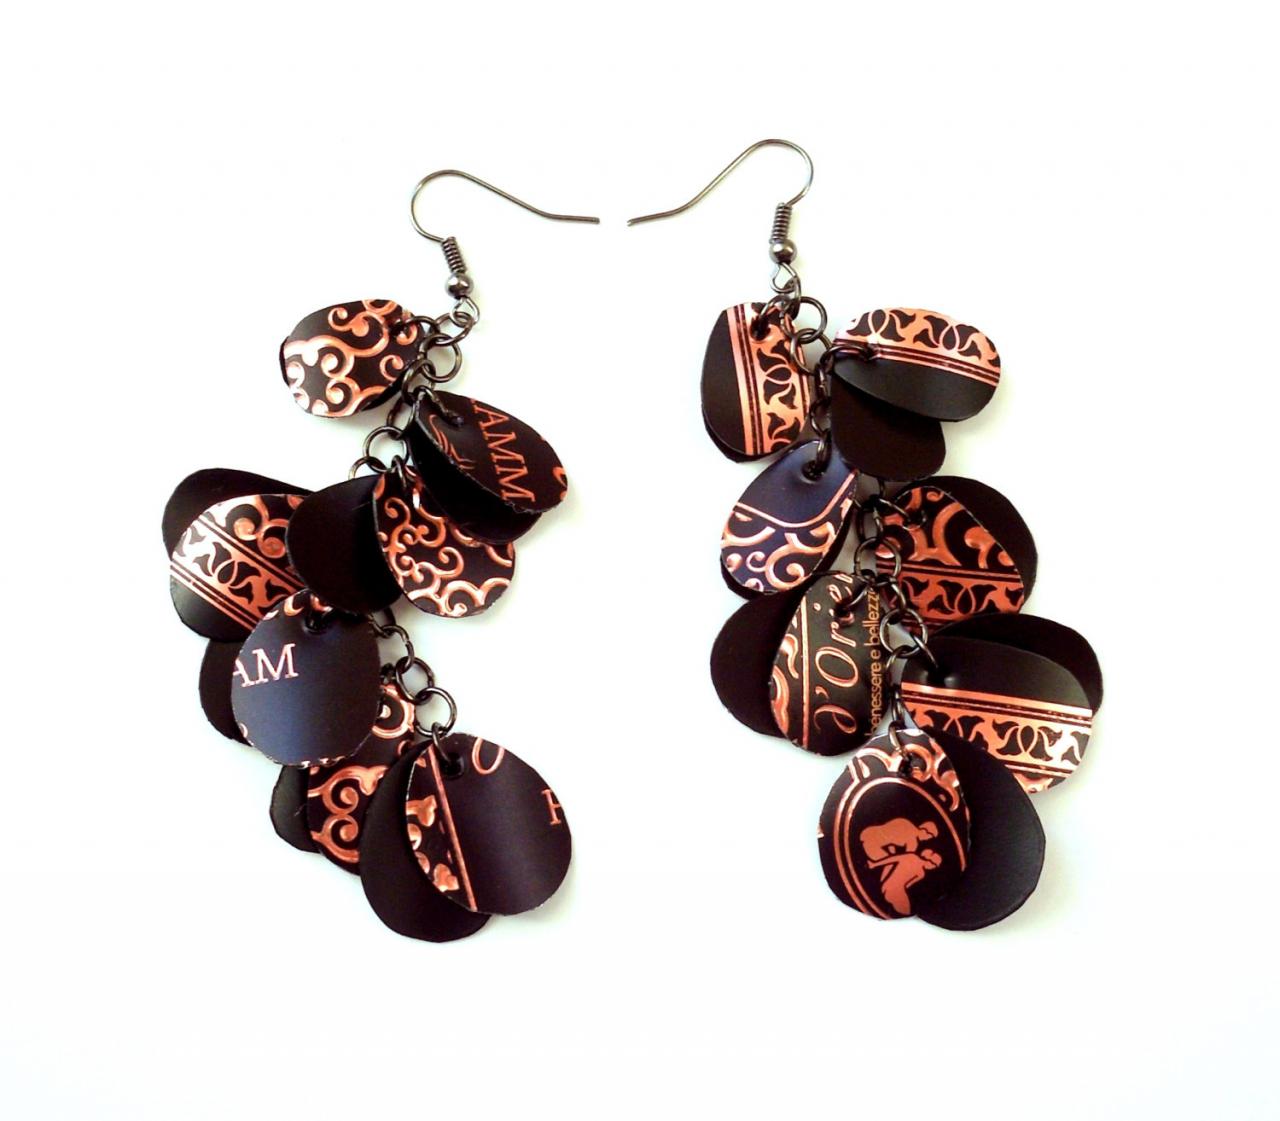 Very Long Black Earrings Made From Recycled Bottle, Friendly Plastic Eco Jewelry, Ethnic Upcycled Earrings In Tribal Style